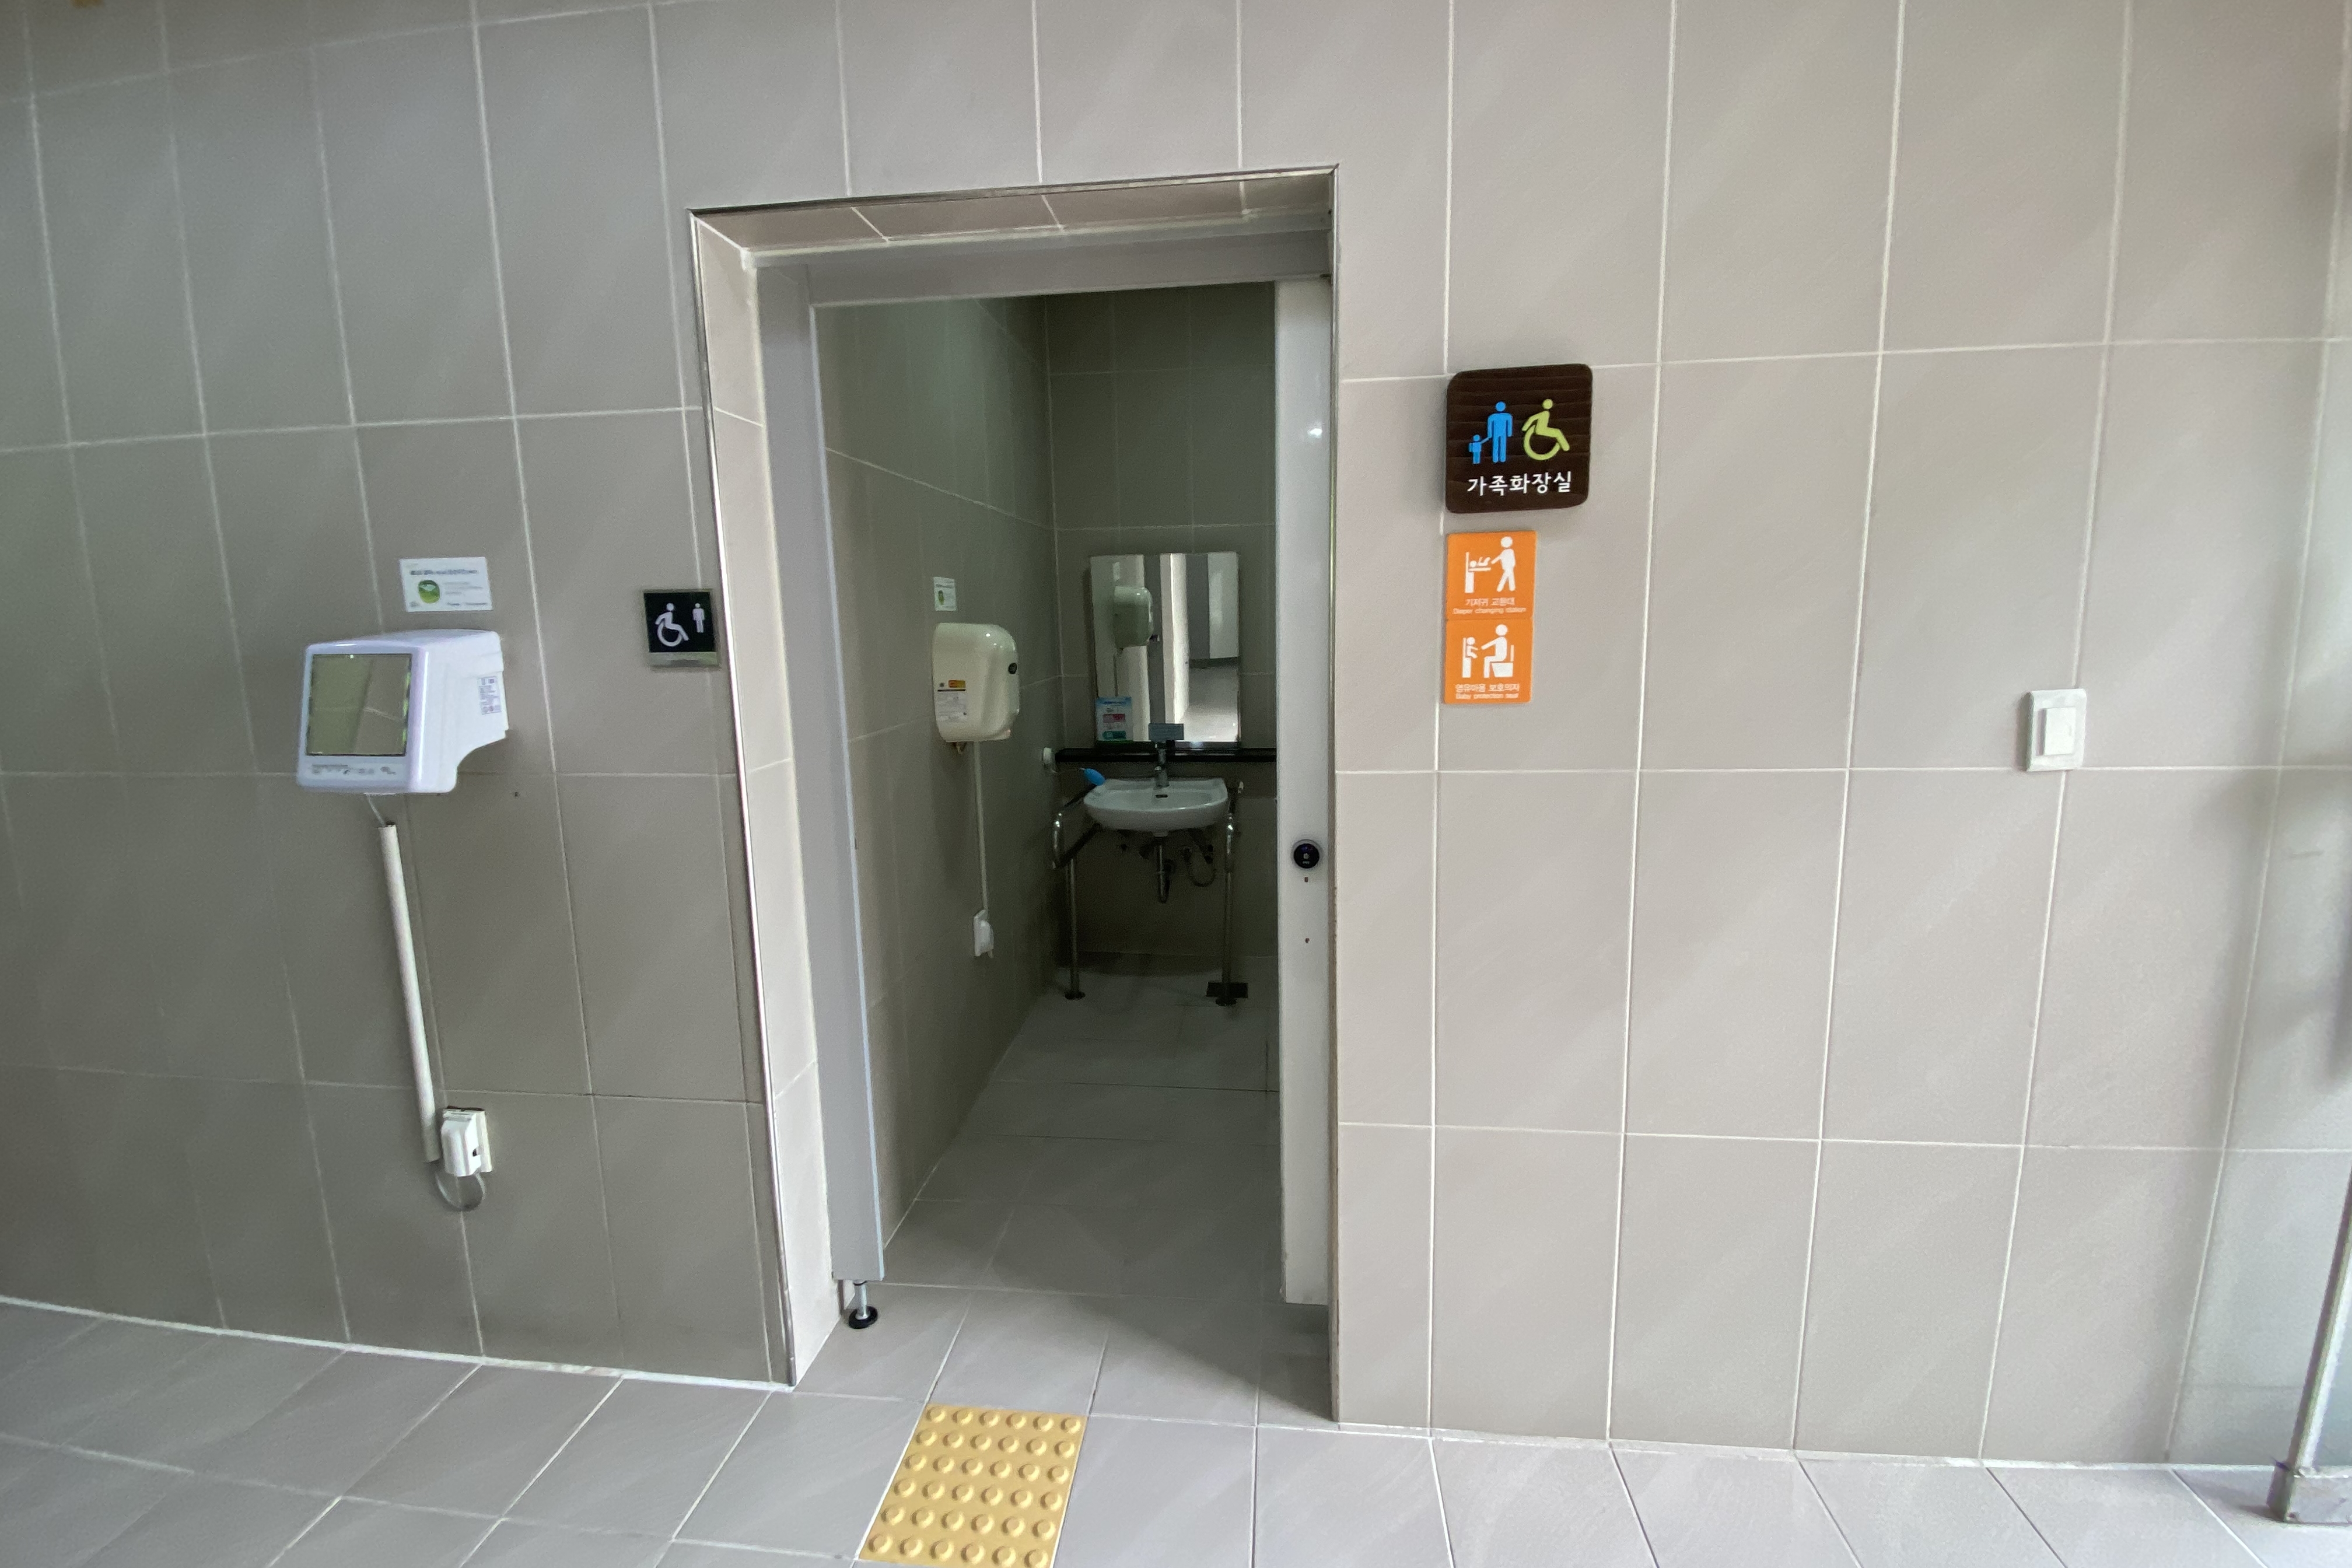 Accessible restrooms0 : Entrance/exit of the accessible restroom at Seoul Children's Grand Park